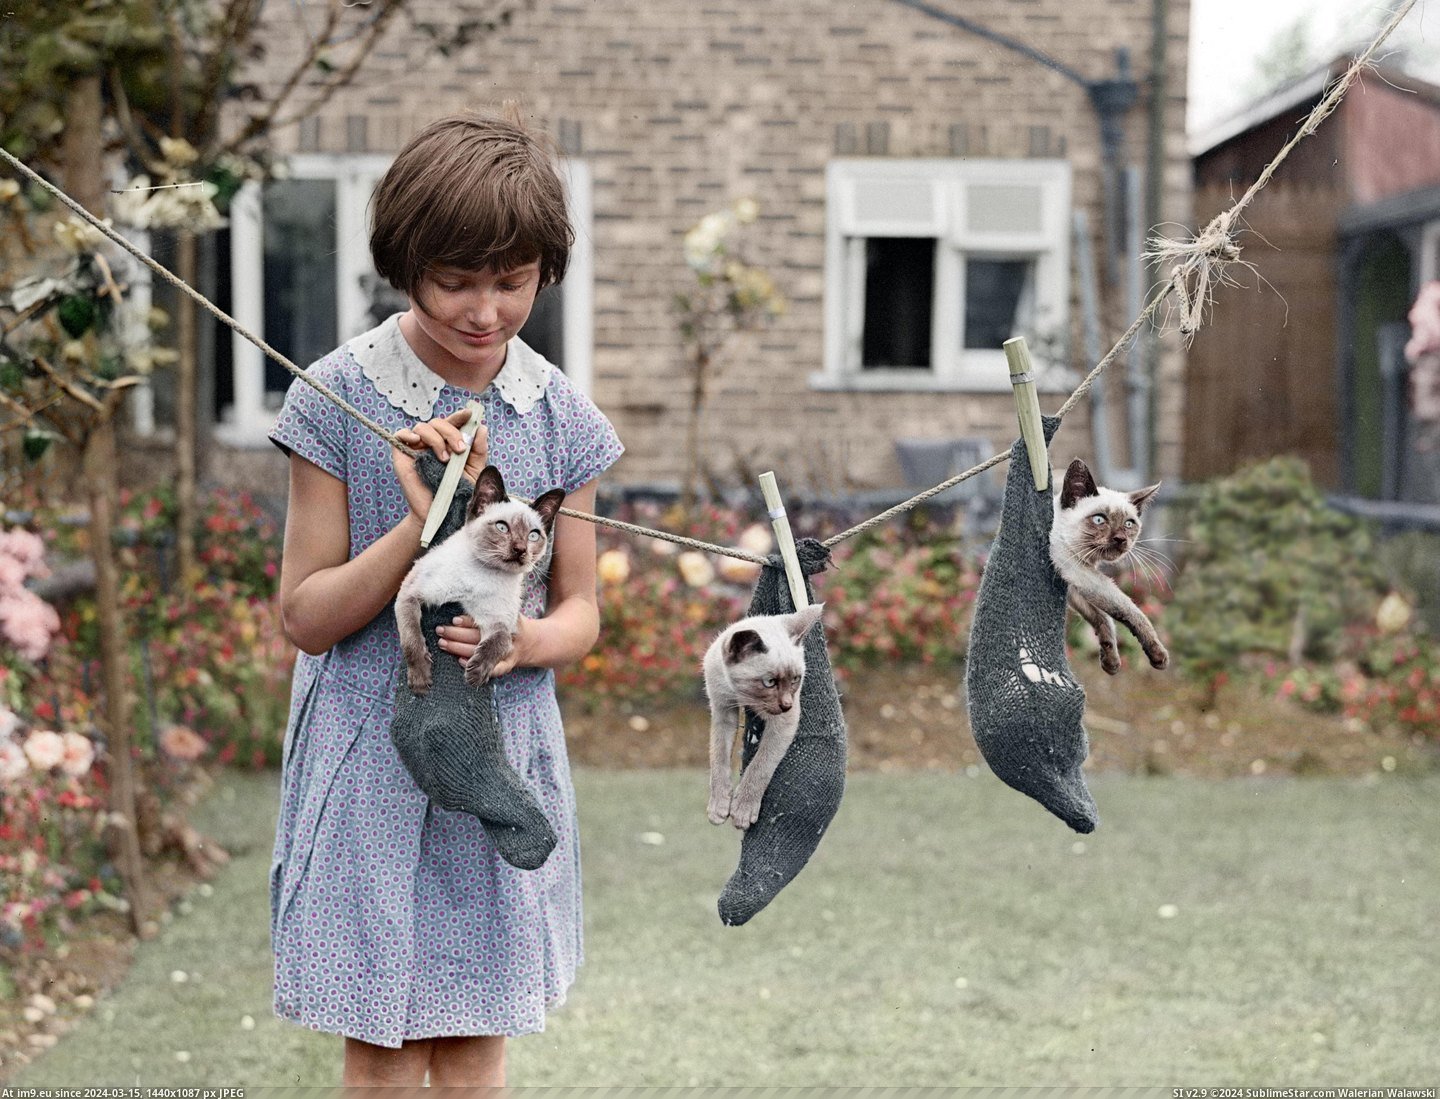 #Image #Kittens #Colorized #Girl [Pics] I Colorized an image taken in 1931 of a girl and her kittens Pic. (Image of album My r/PICS favs))